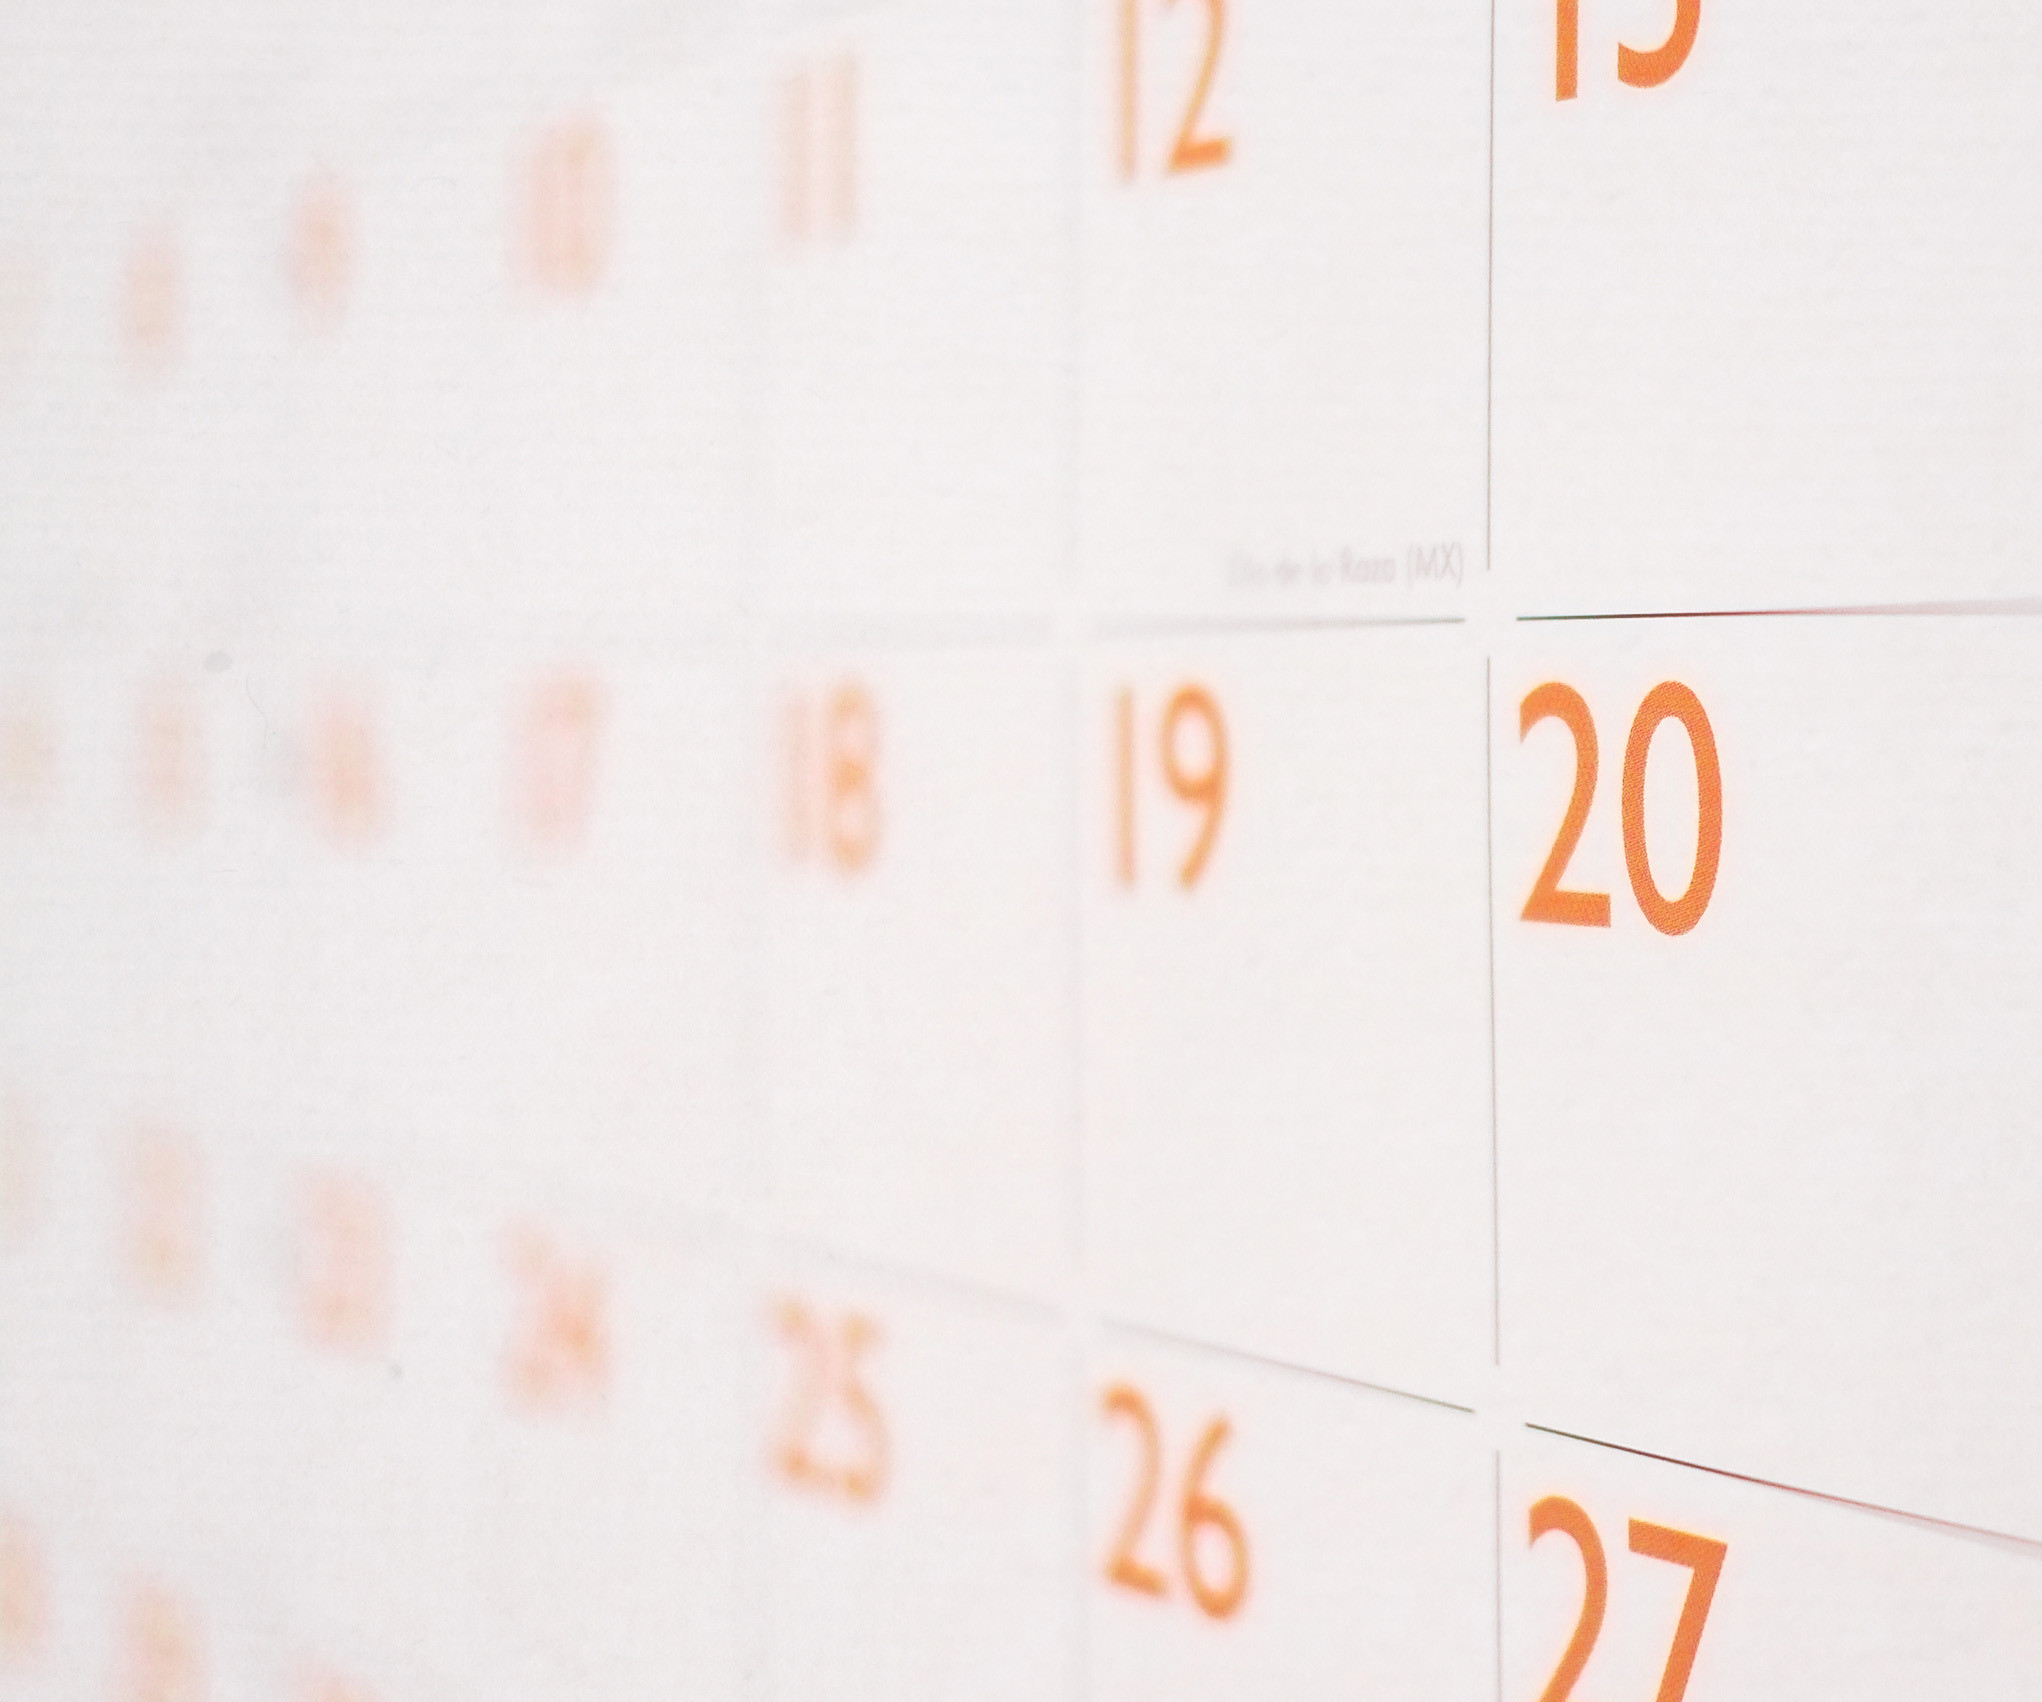 How many weeks in a year and what are our public holidays?